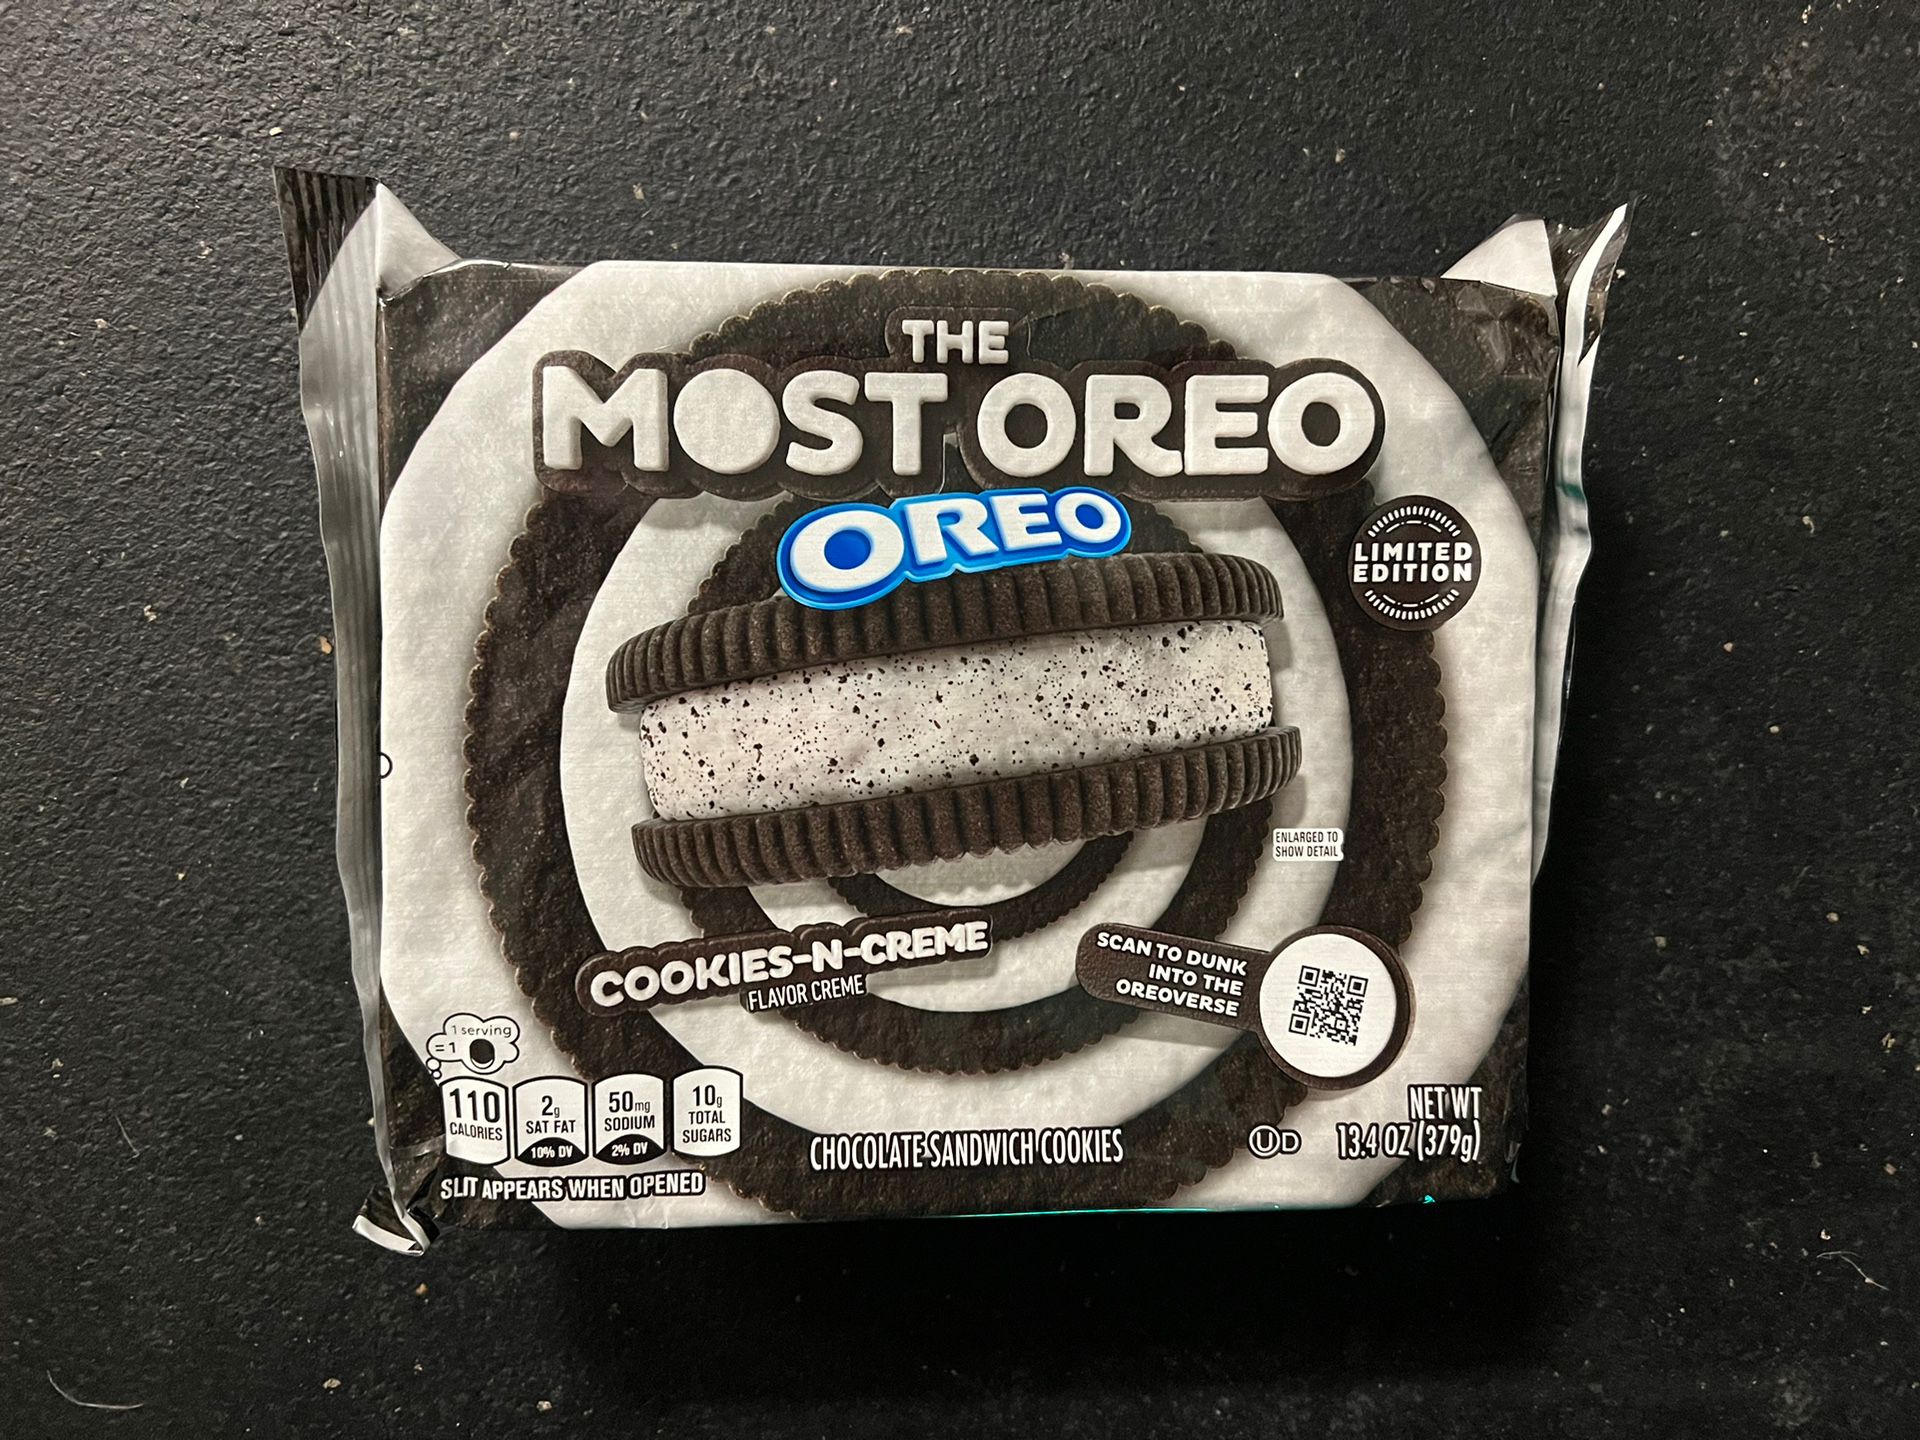 The Most OREO OREO Limited Edition Cookies-N-Creme Cookies Confirmed Order 